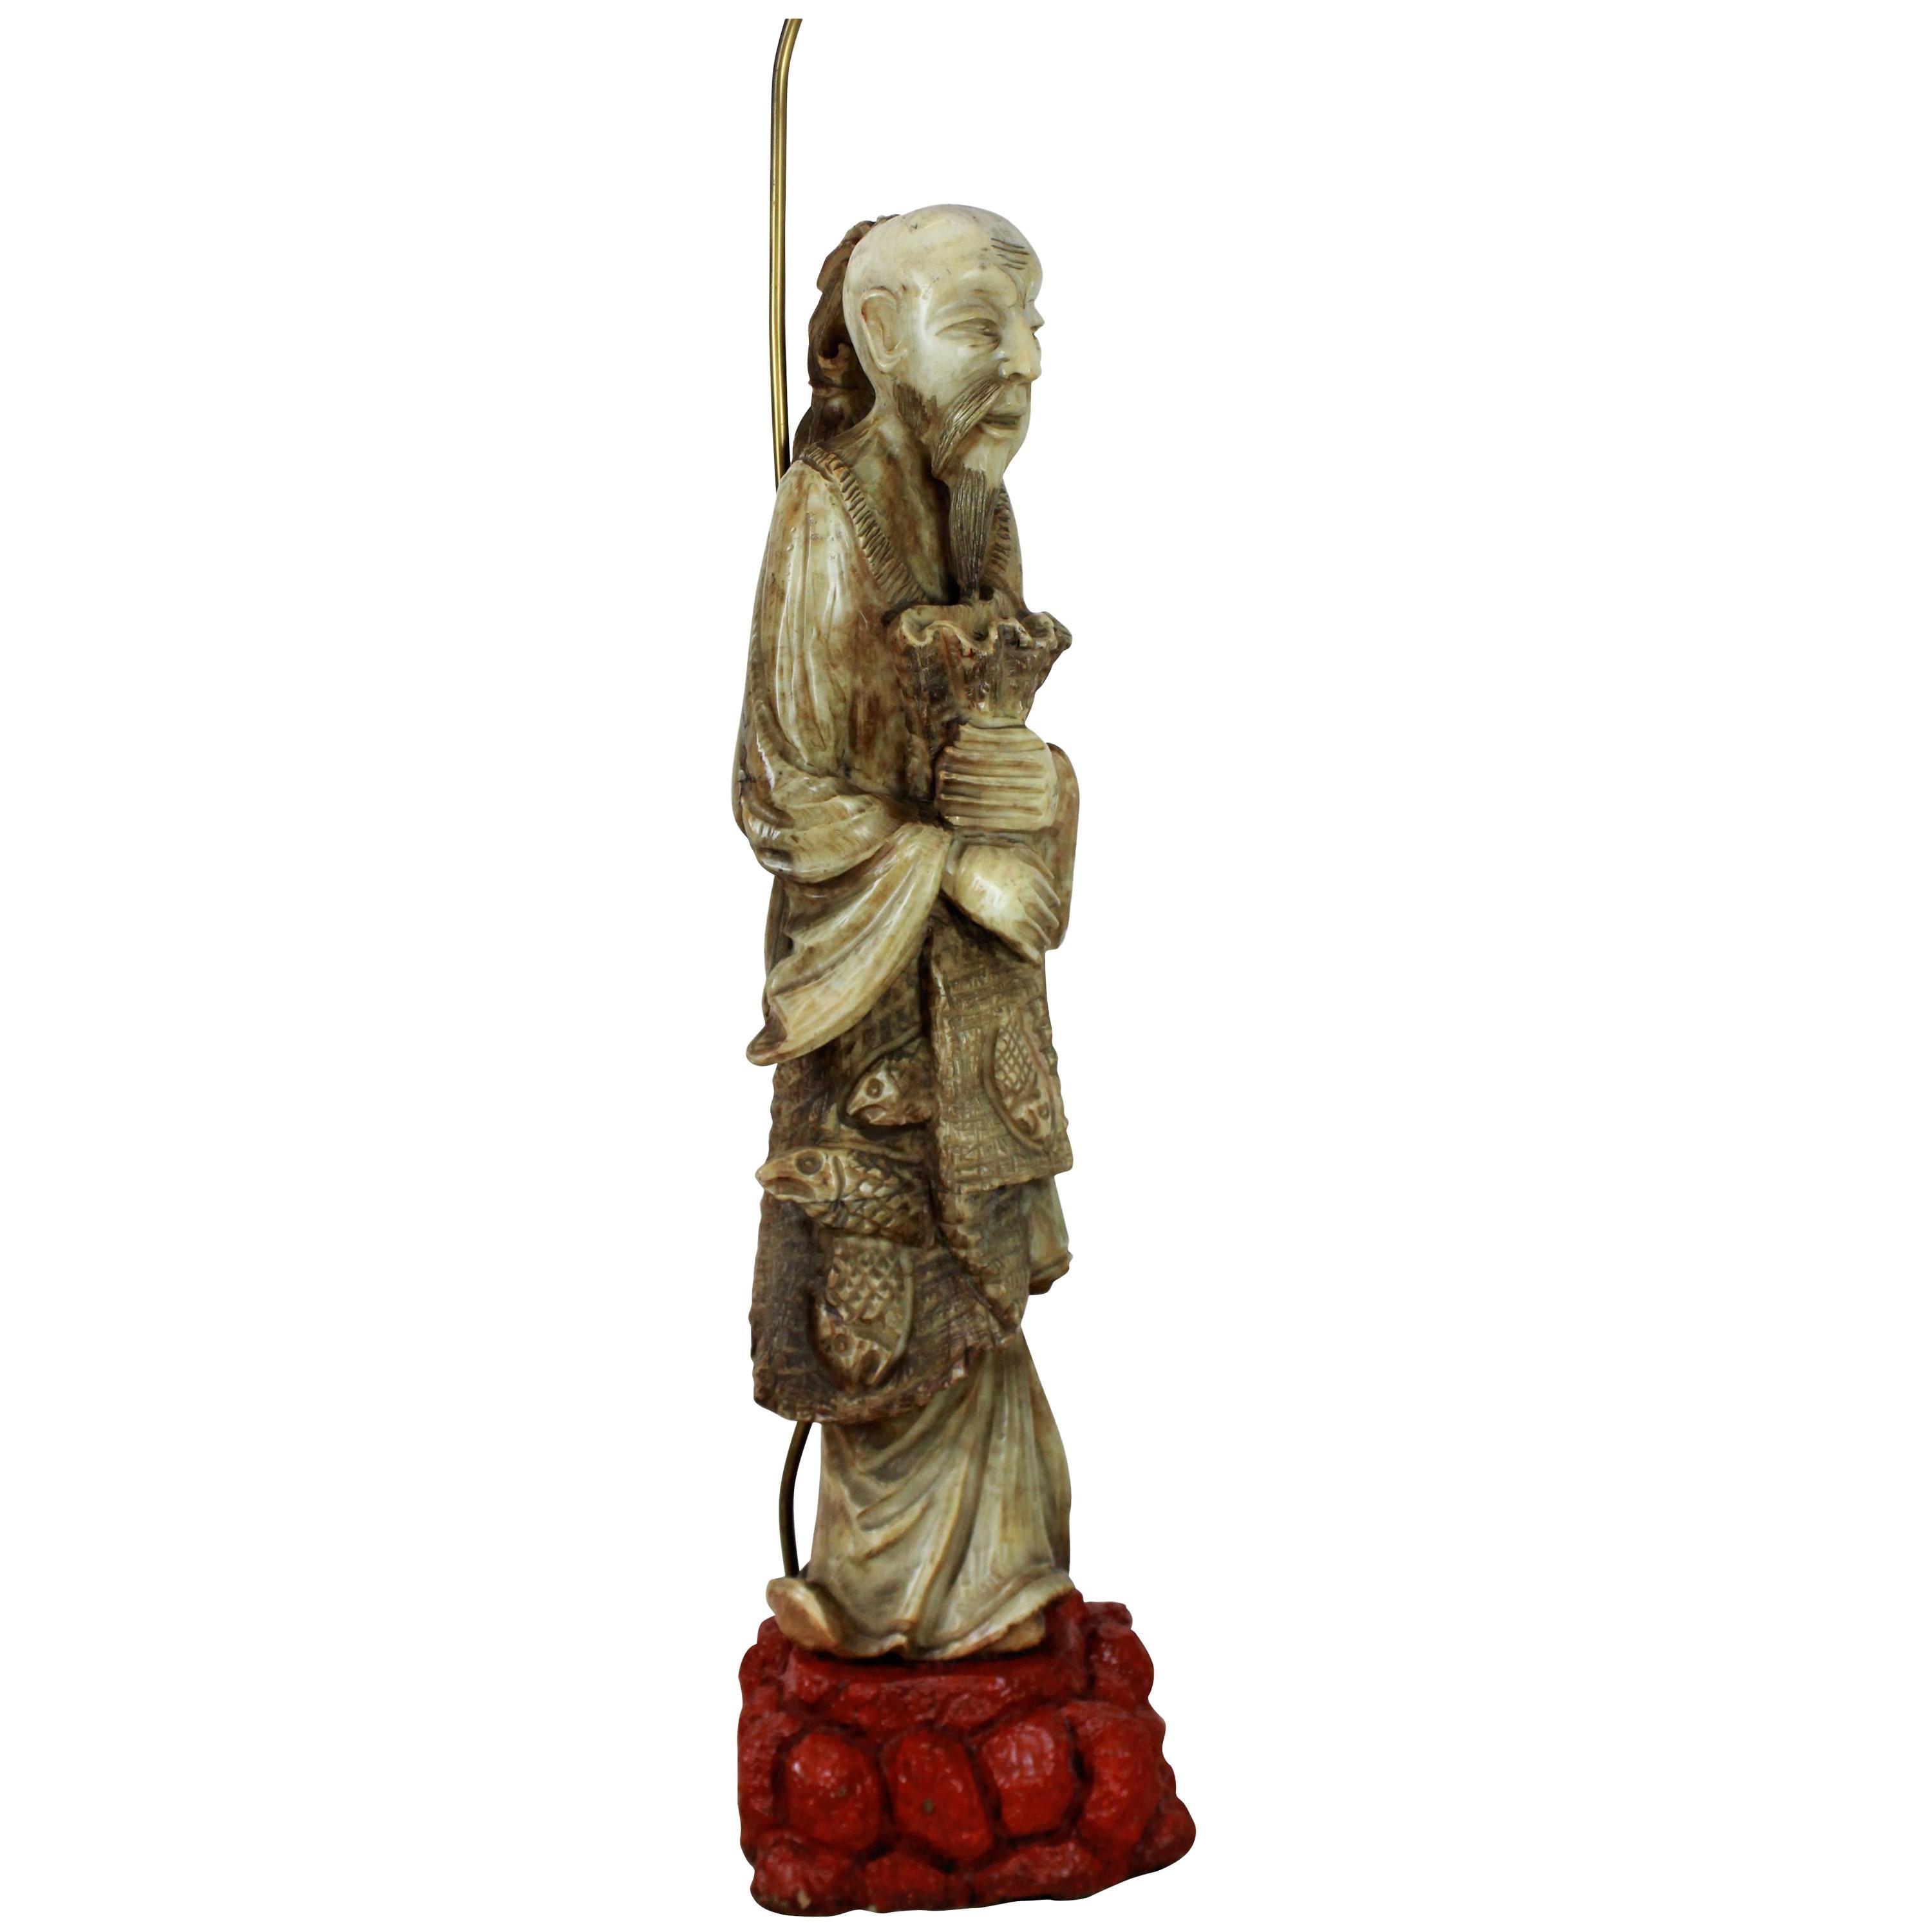 Marble Floor Lamp Depicting a Chinese Fisherman